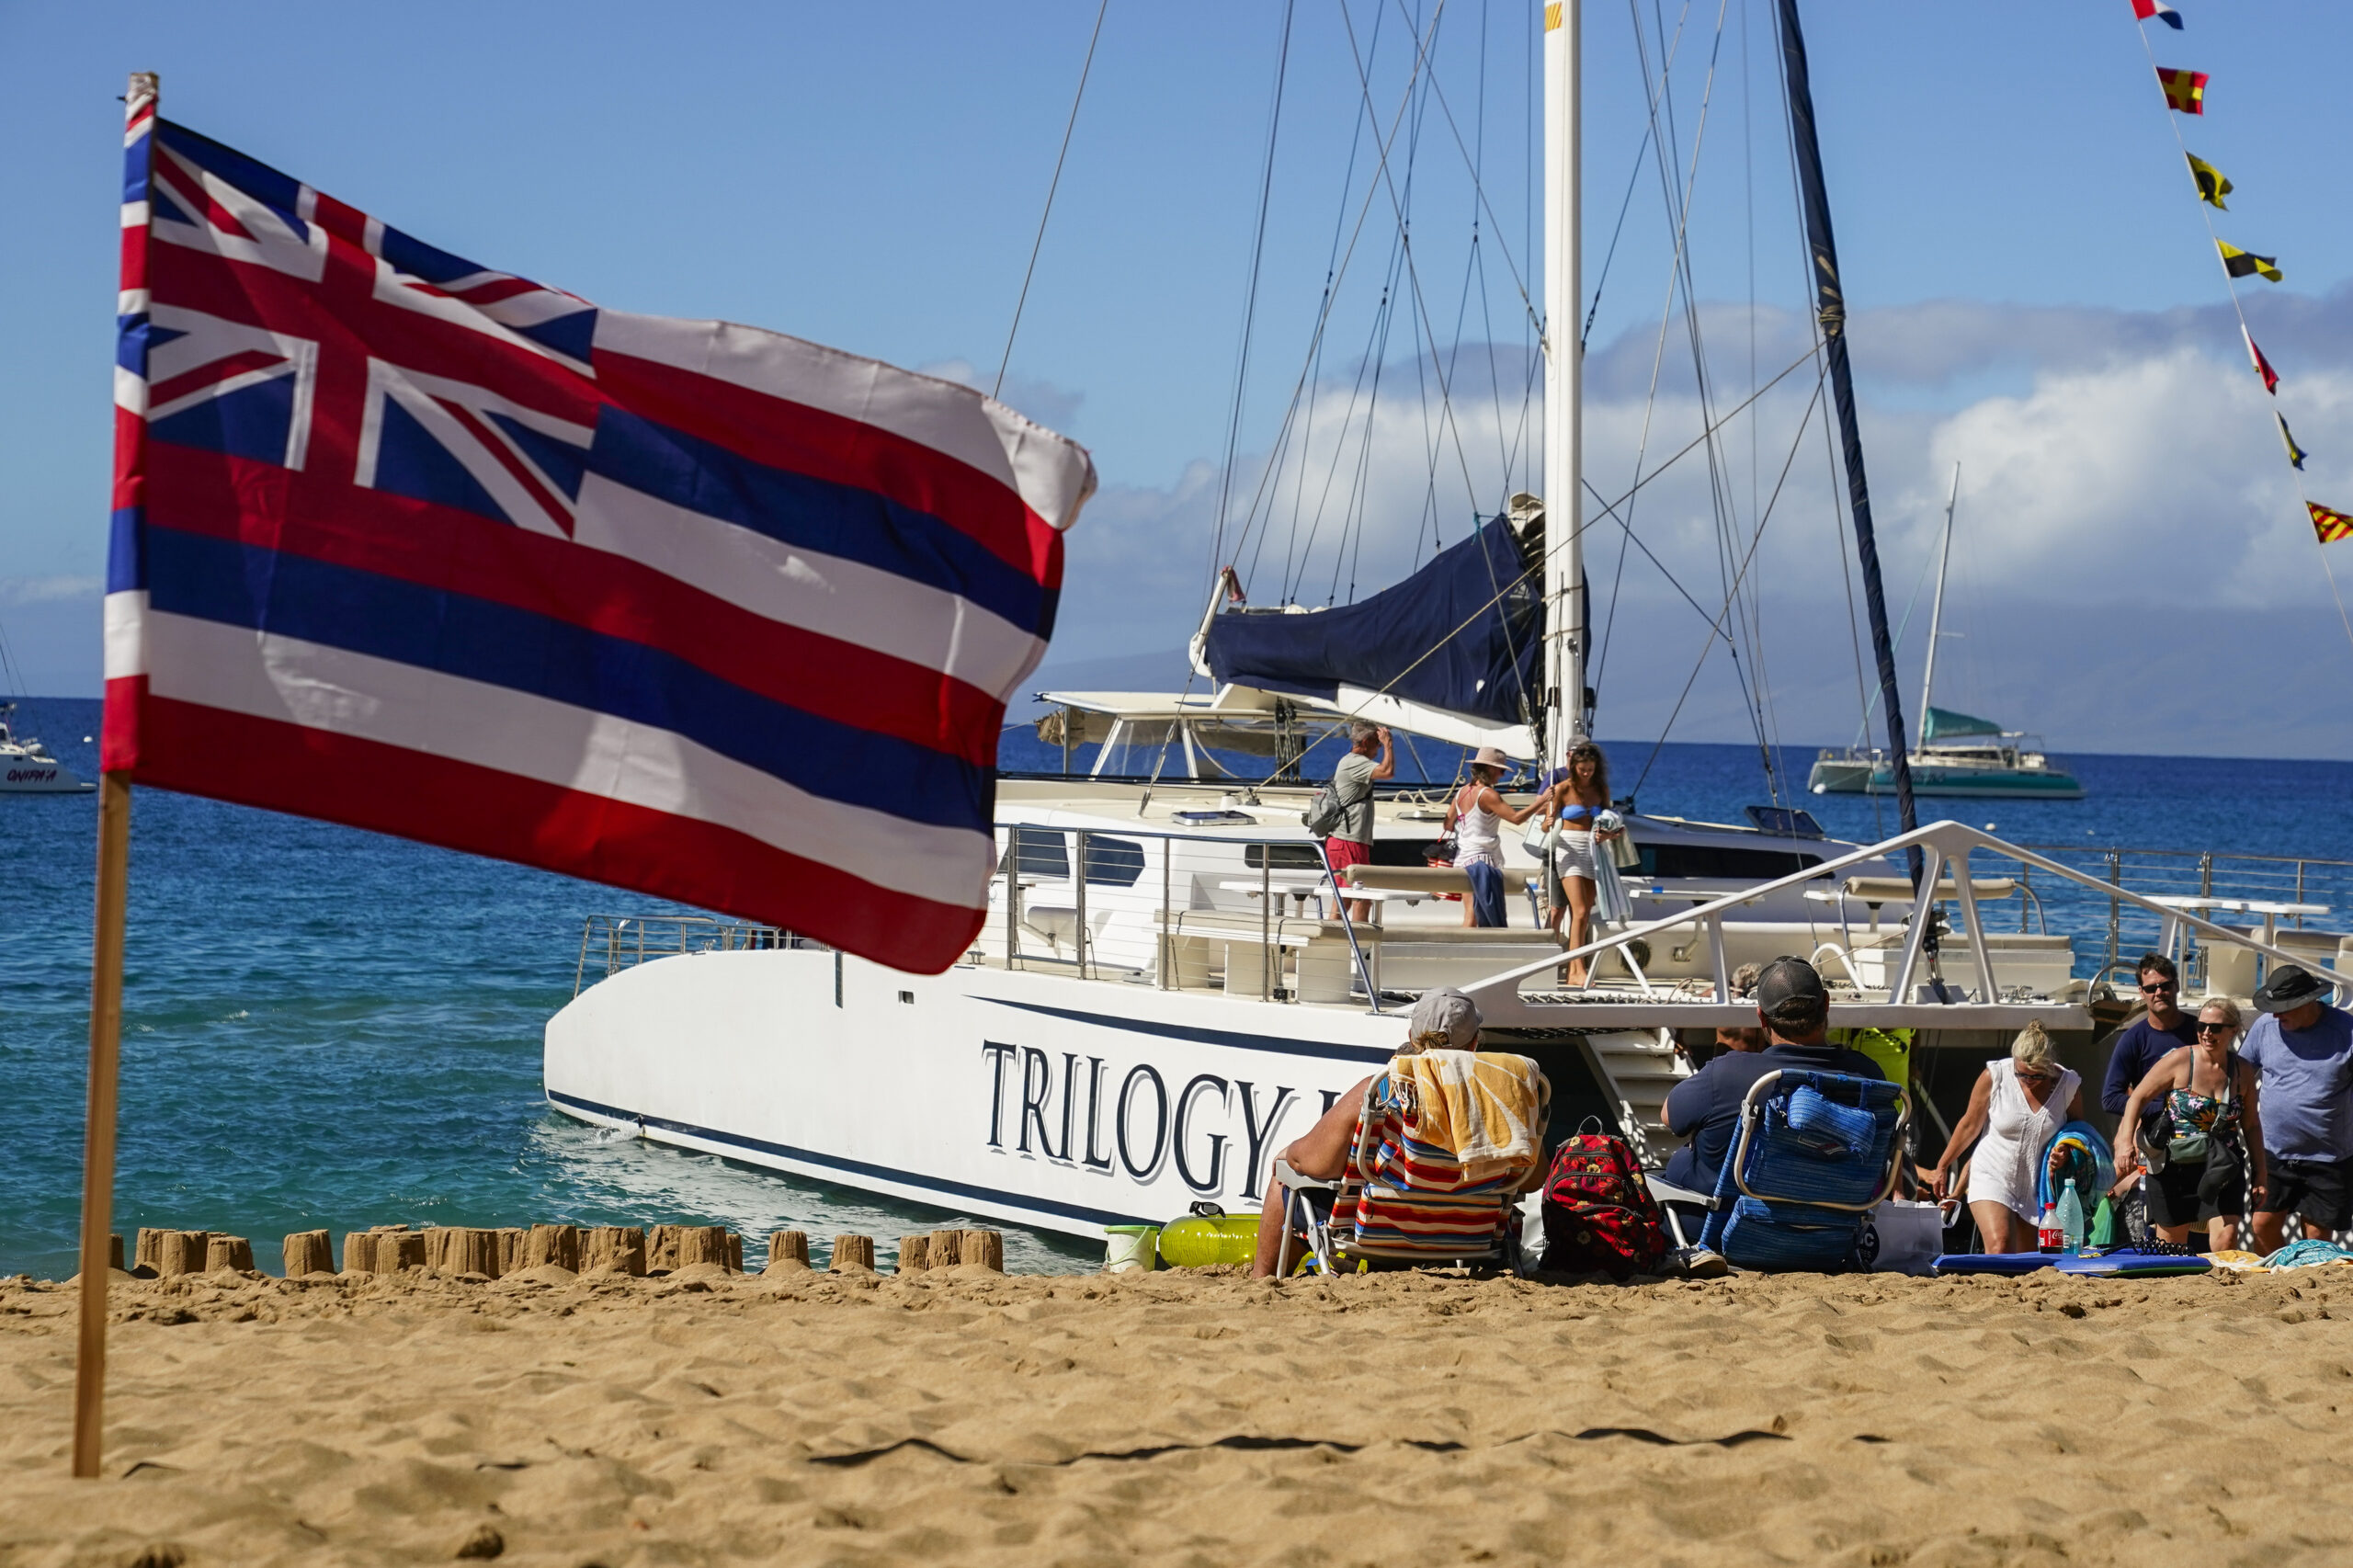 Tourists get off of a Trilogy Excursions boat arriving on Kaanapali Beach in front of a flag of Haw...